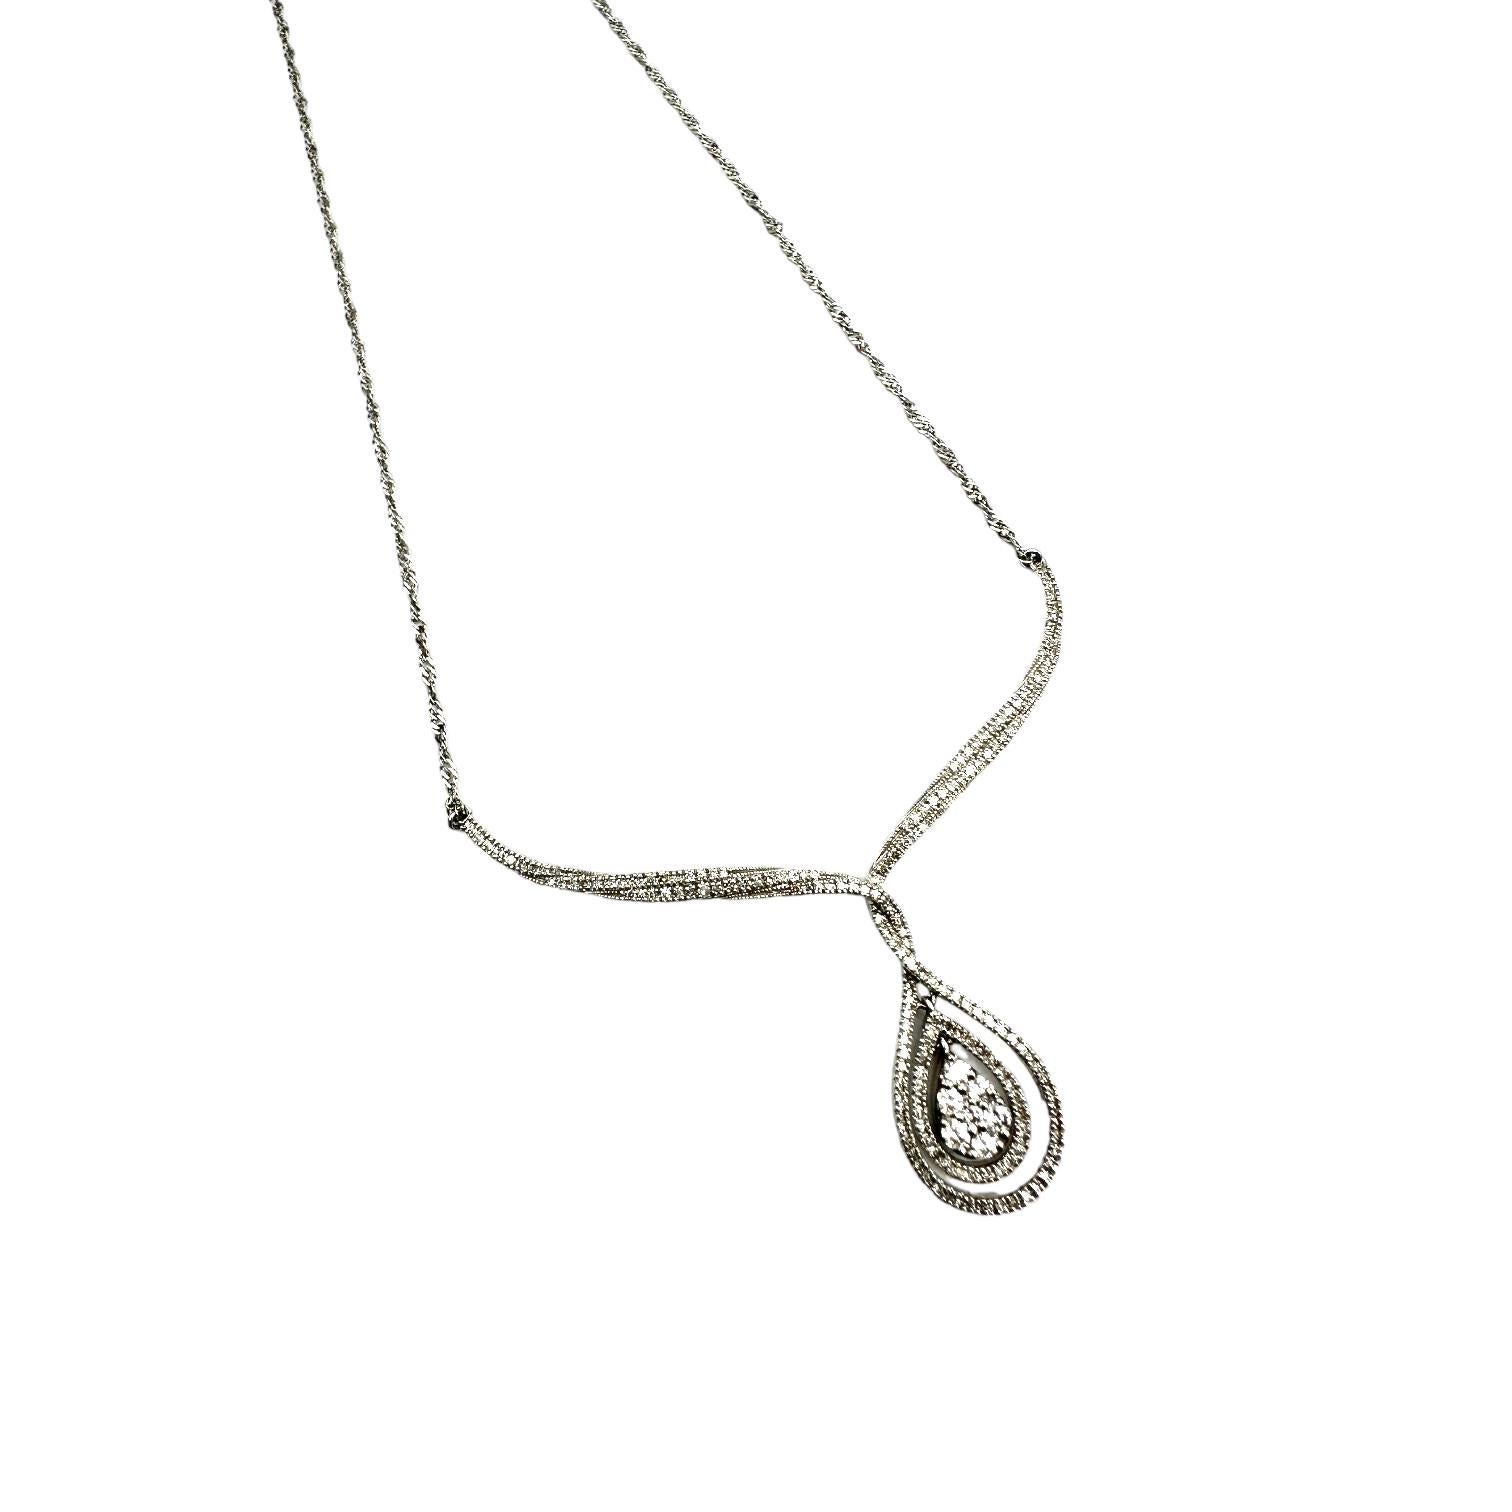 Contemporary, 14-karat white gold “V” shaped pendant necklace with a double halo. Accented surrounding diamonds are set in a halo with a milgrain-setting and attached to a V pave setting. 
The necklace measures three inches wide and two inches long